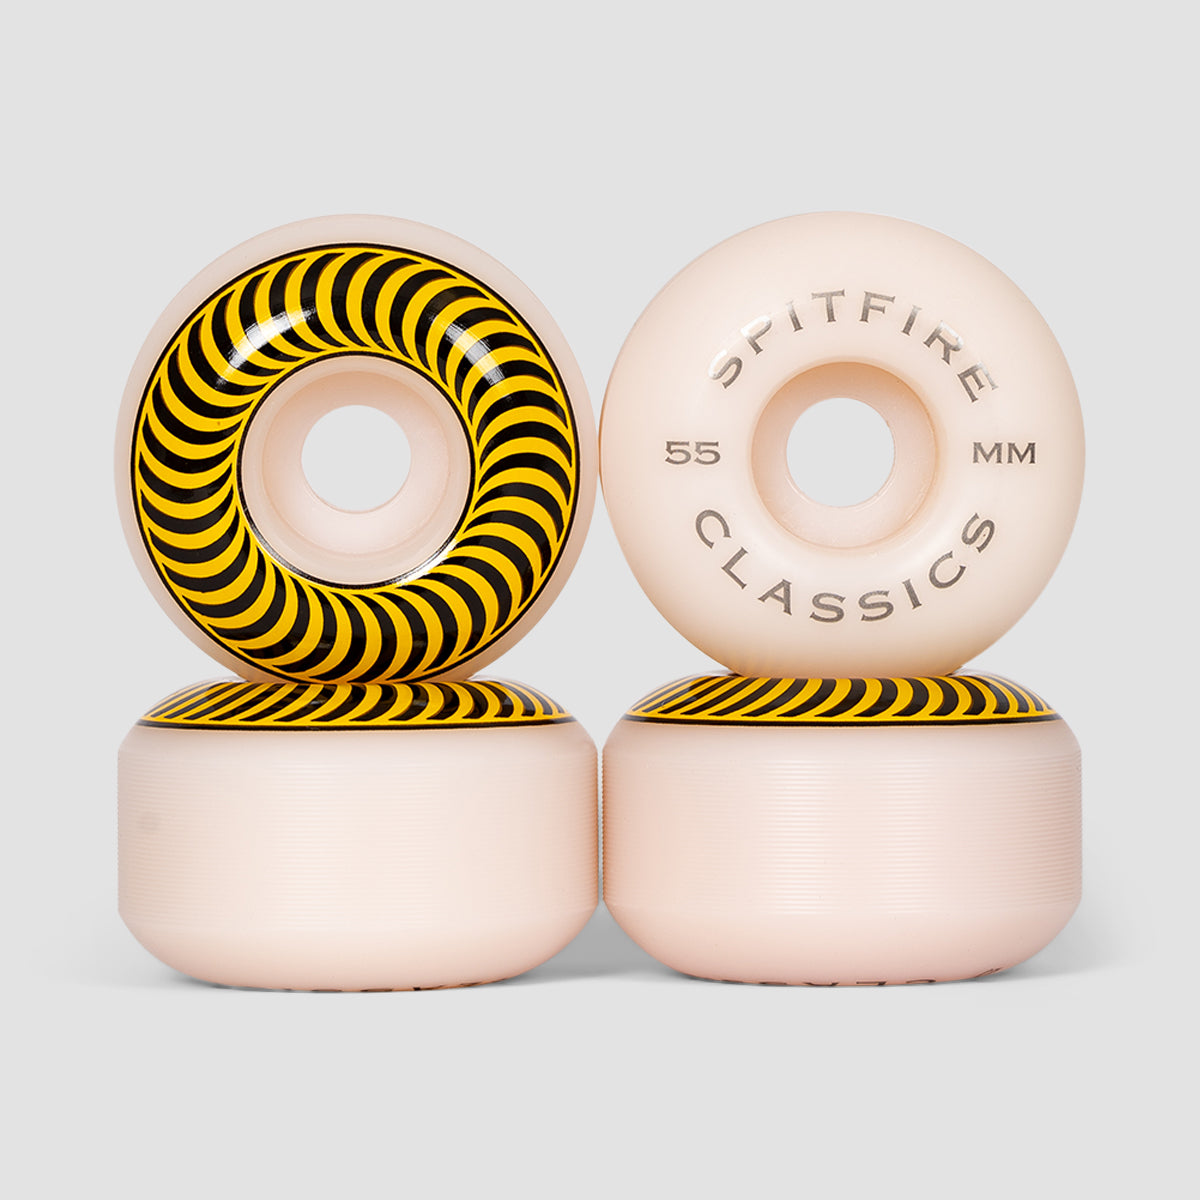 Spitfire Classic Skateboard Wheels White/Yellow 55mm 99a